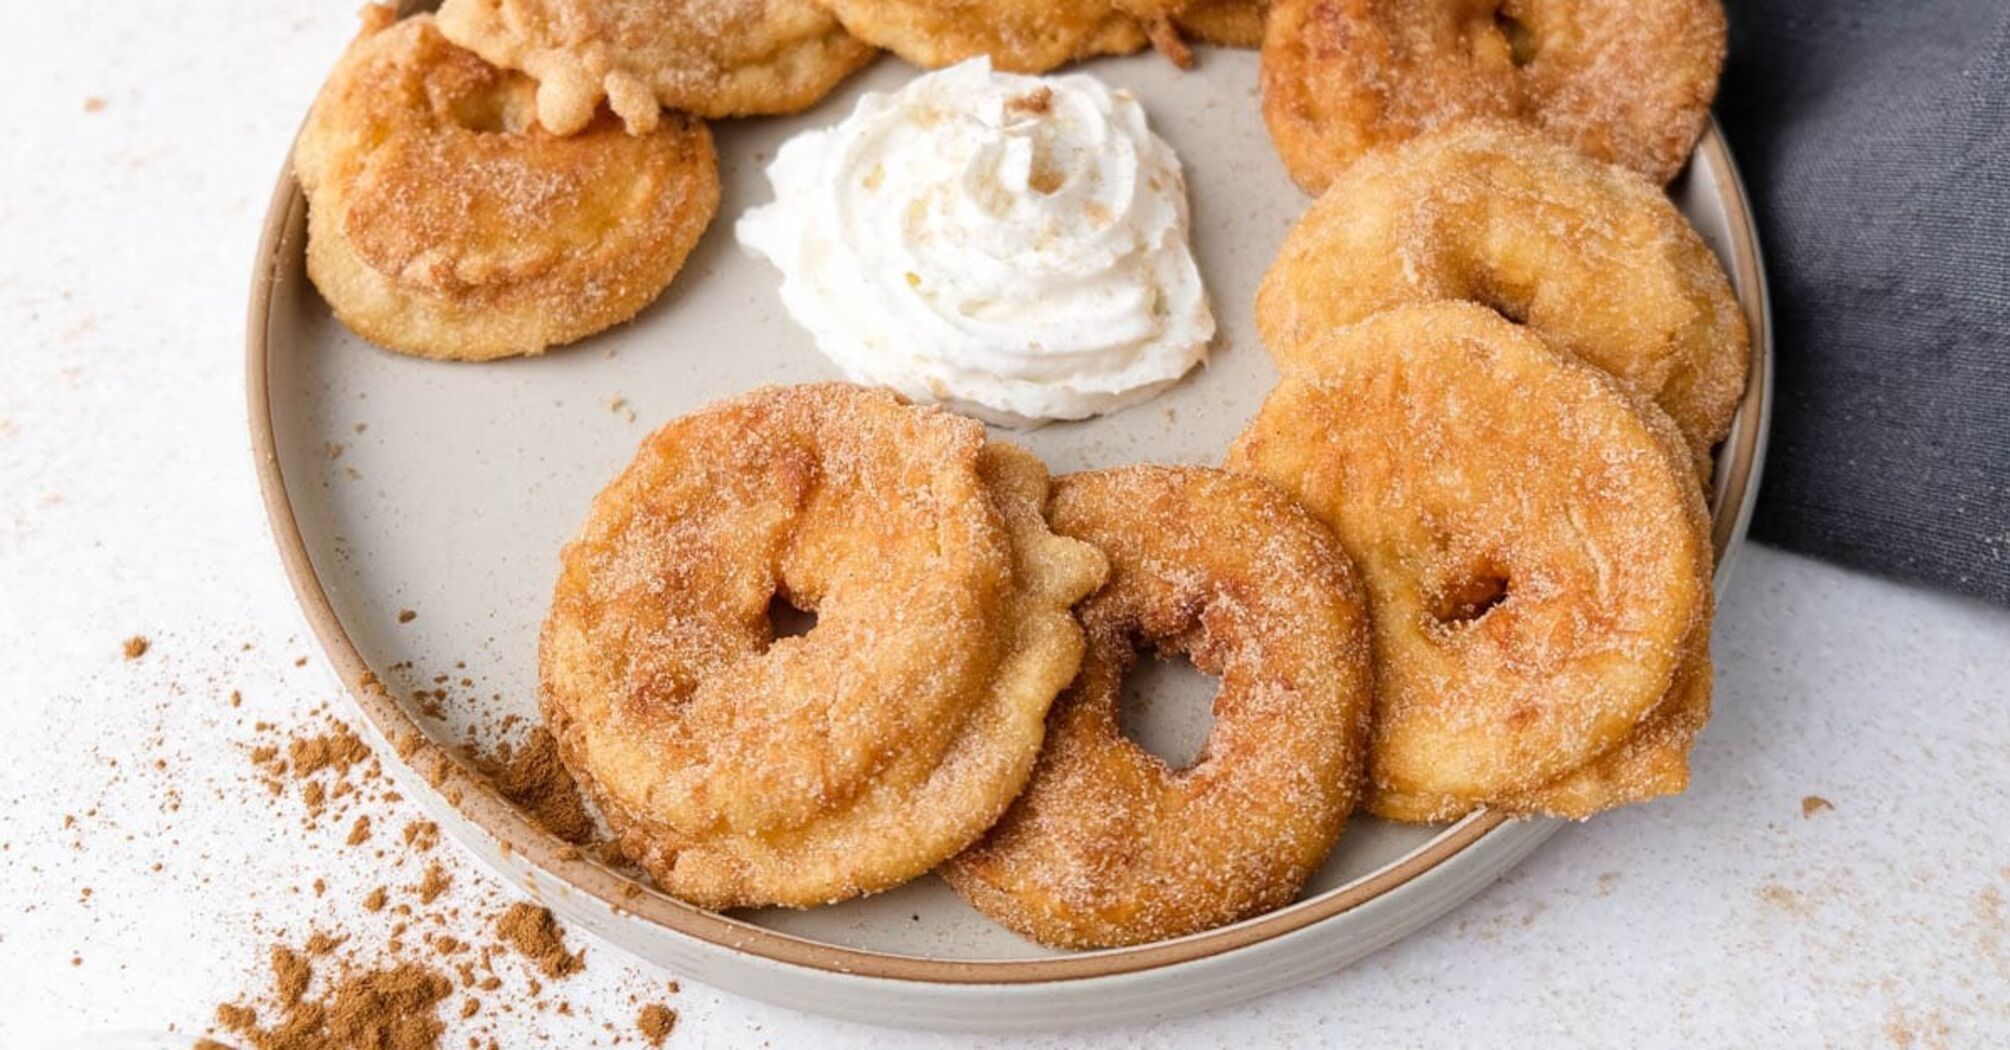 Lazy apple rings instead of pancakes: ready in minutes